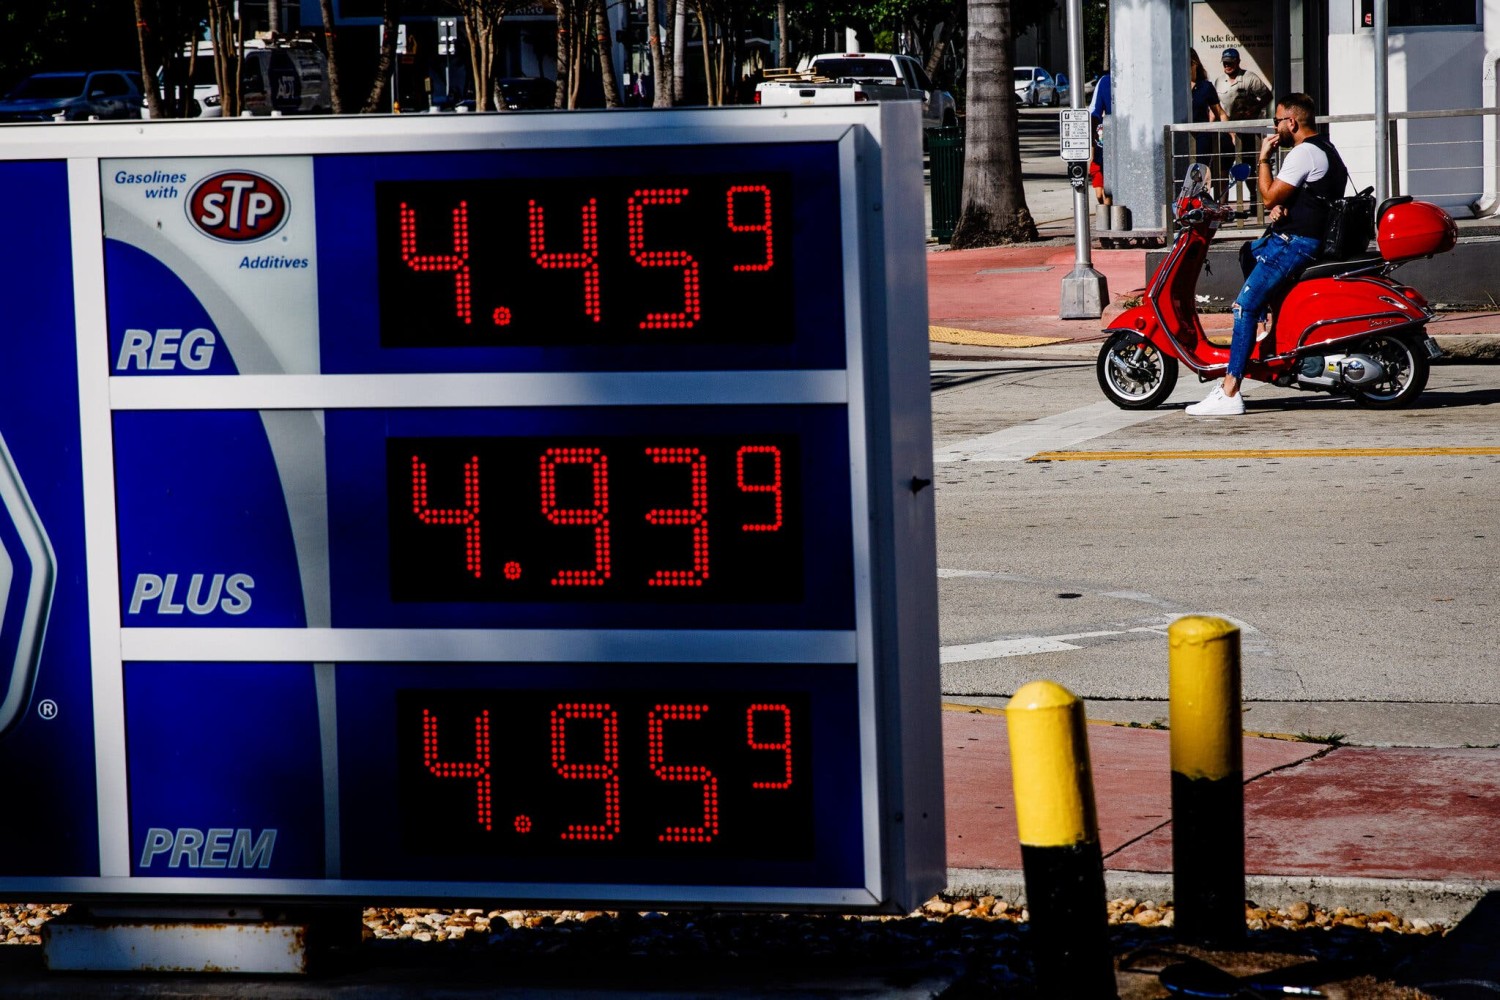 A gas station in Miami Beach, Fla., last week. The cost of gasoline in the United States is approaching record levels.Credit...Scott McIntyre for The New York Times